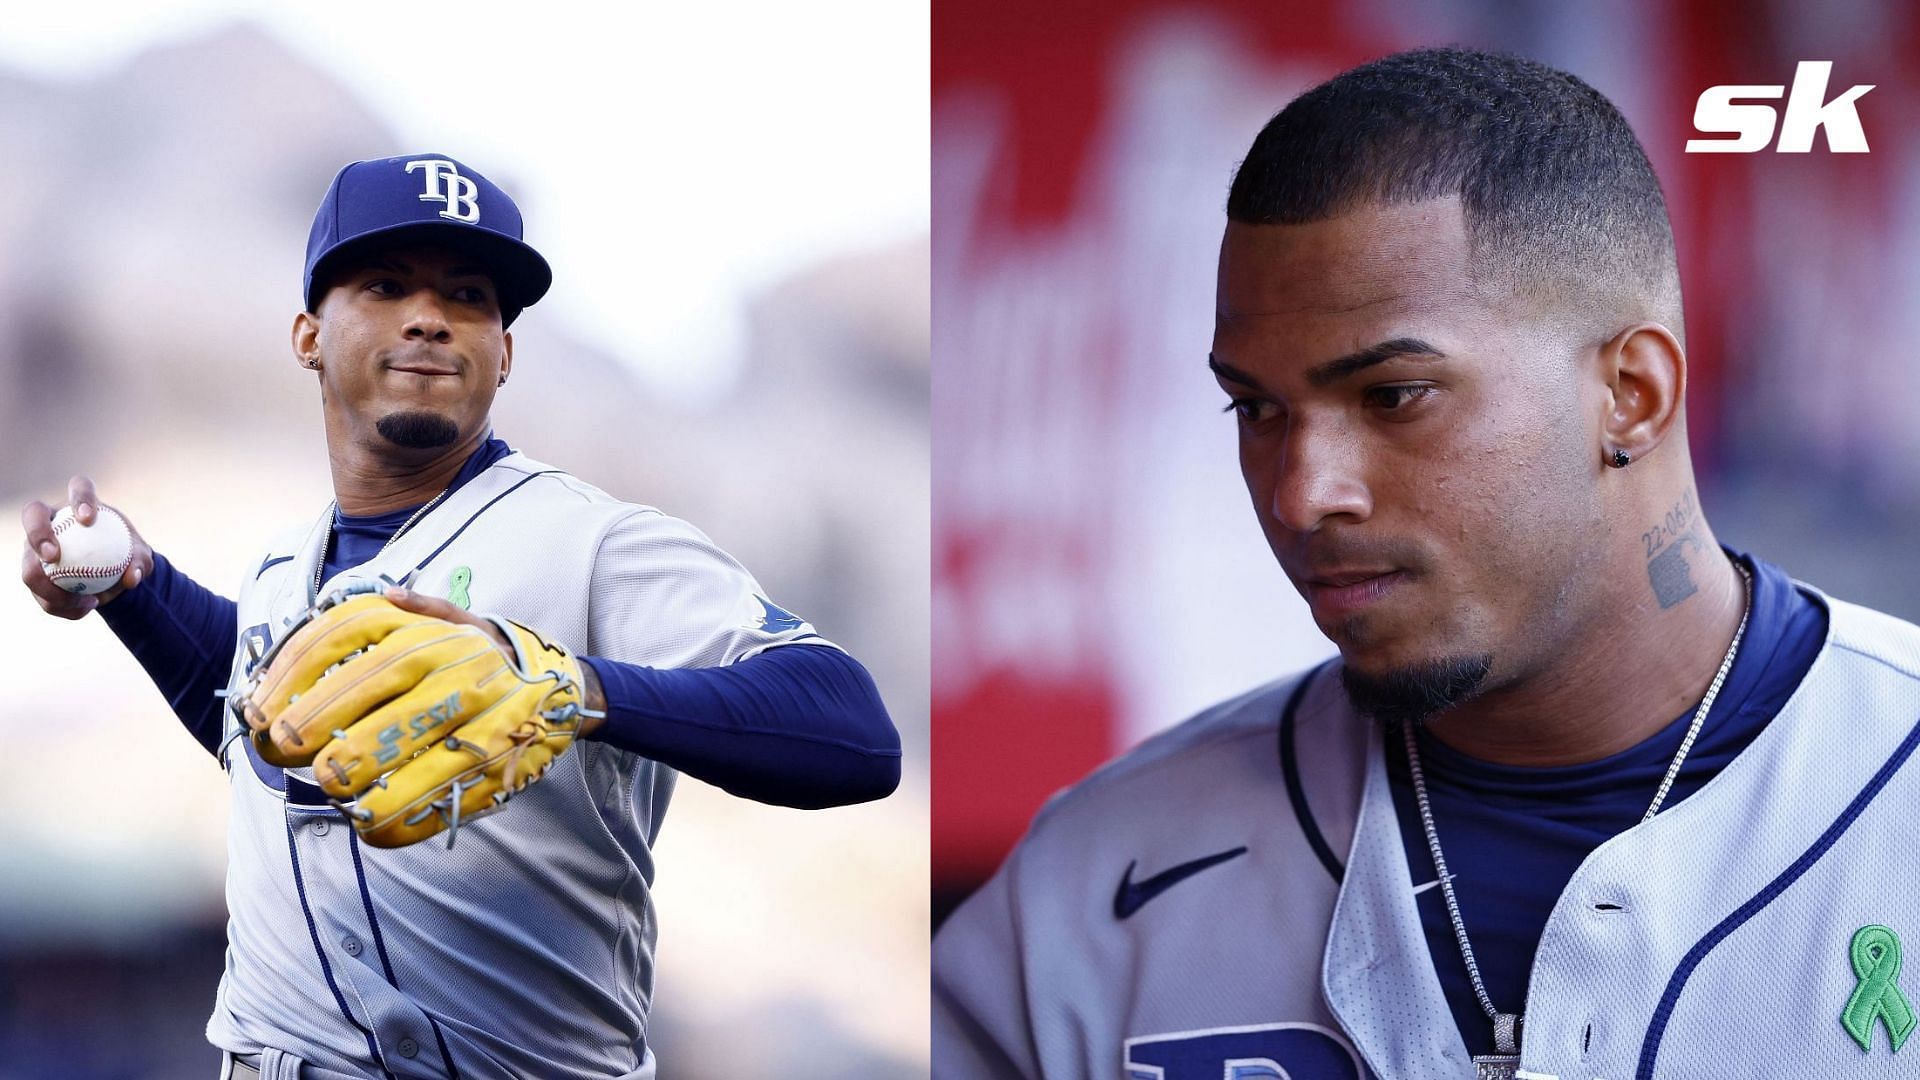 Tampa Bay Rays shortstop Wander Franco could face up to 20 years in prison if convicted 